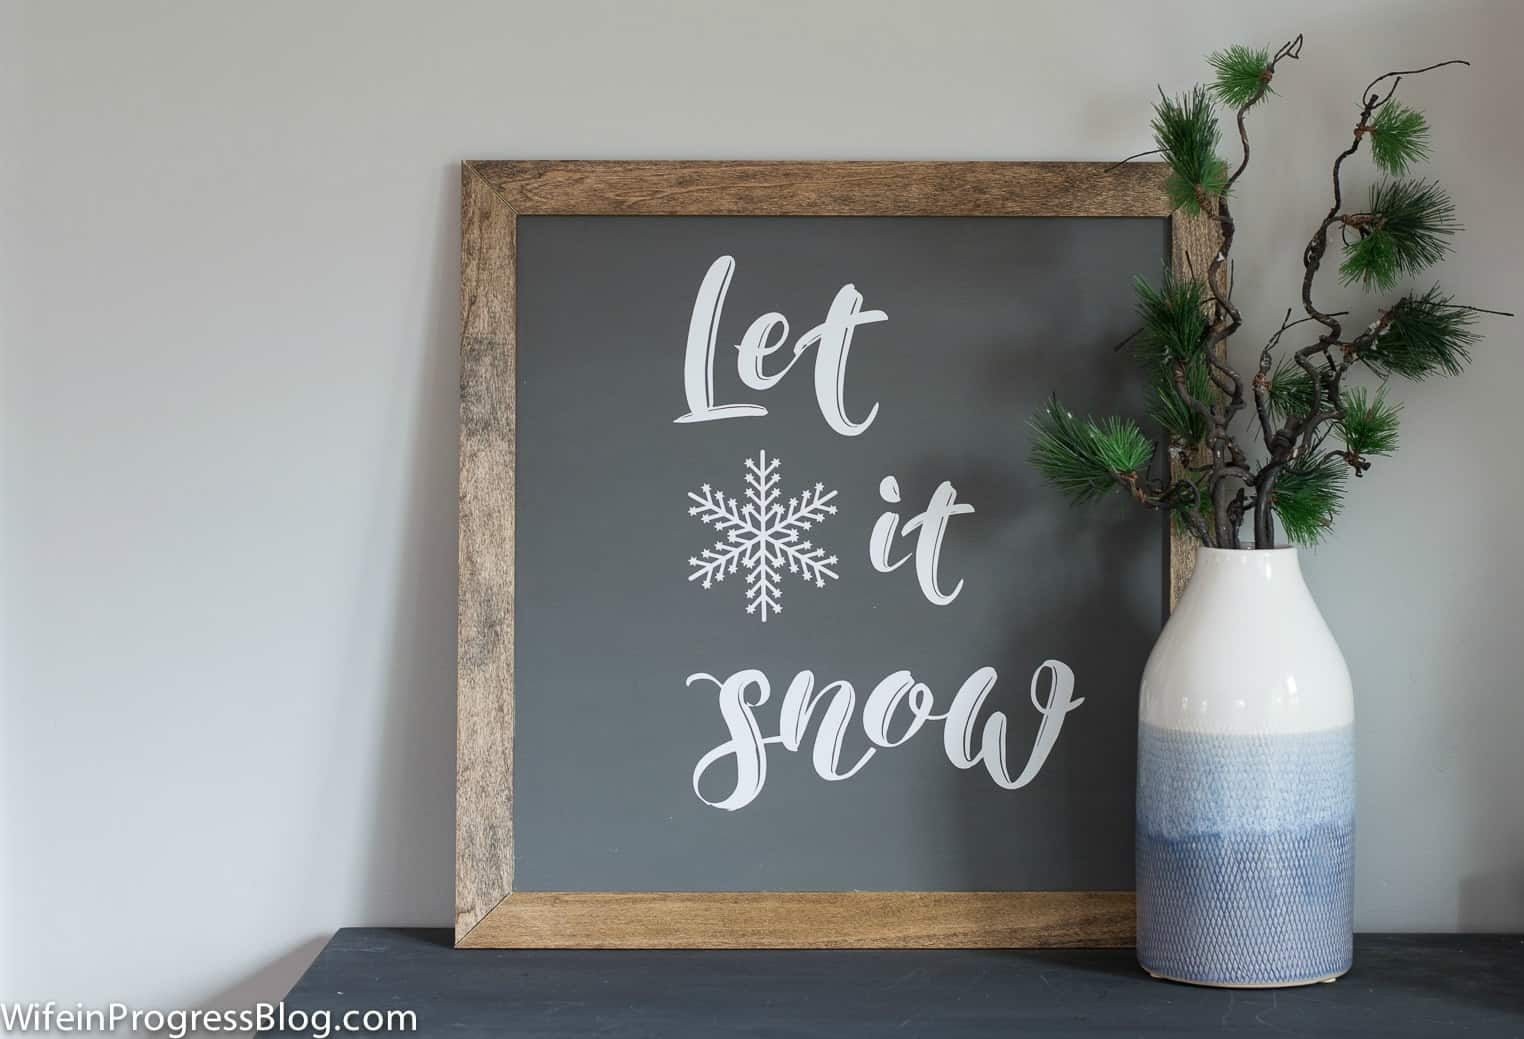 This DIY farmhouse style sign is the perfect Christmas decor! Switch up the words or phrase to fit any time of the year